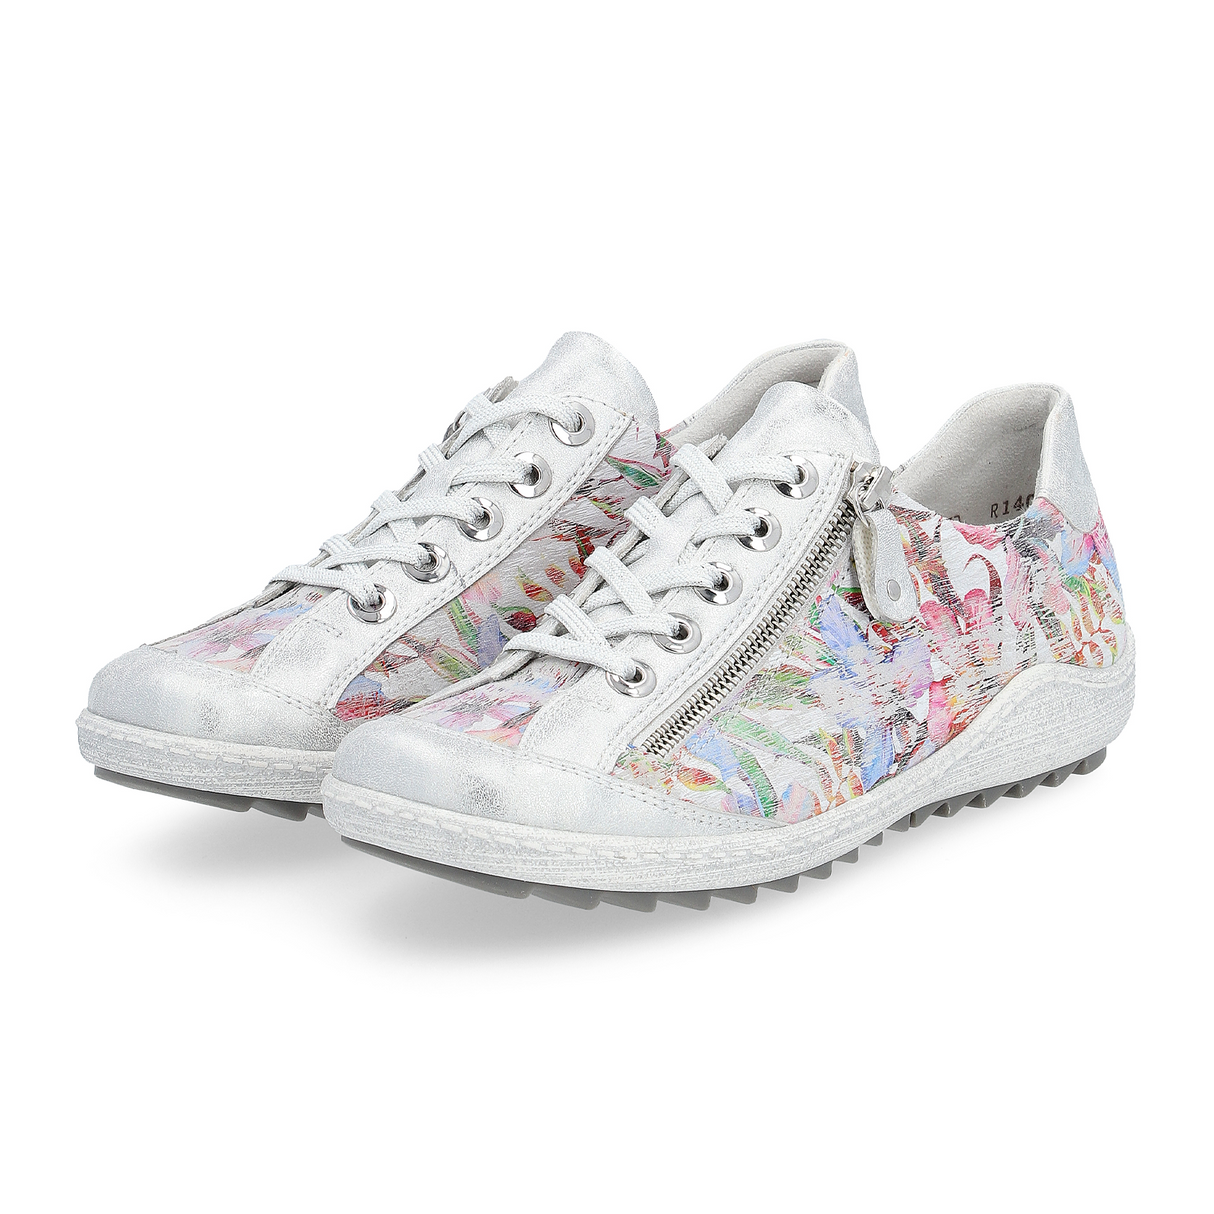 Remonte Liv R1402-96 Sneaker (Women) - Multi Flower Athletic - Casual - Lace Up - The Heel Shoe Fitters